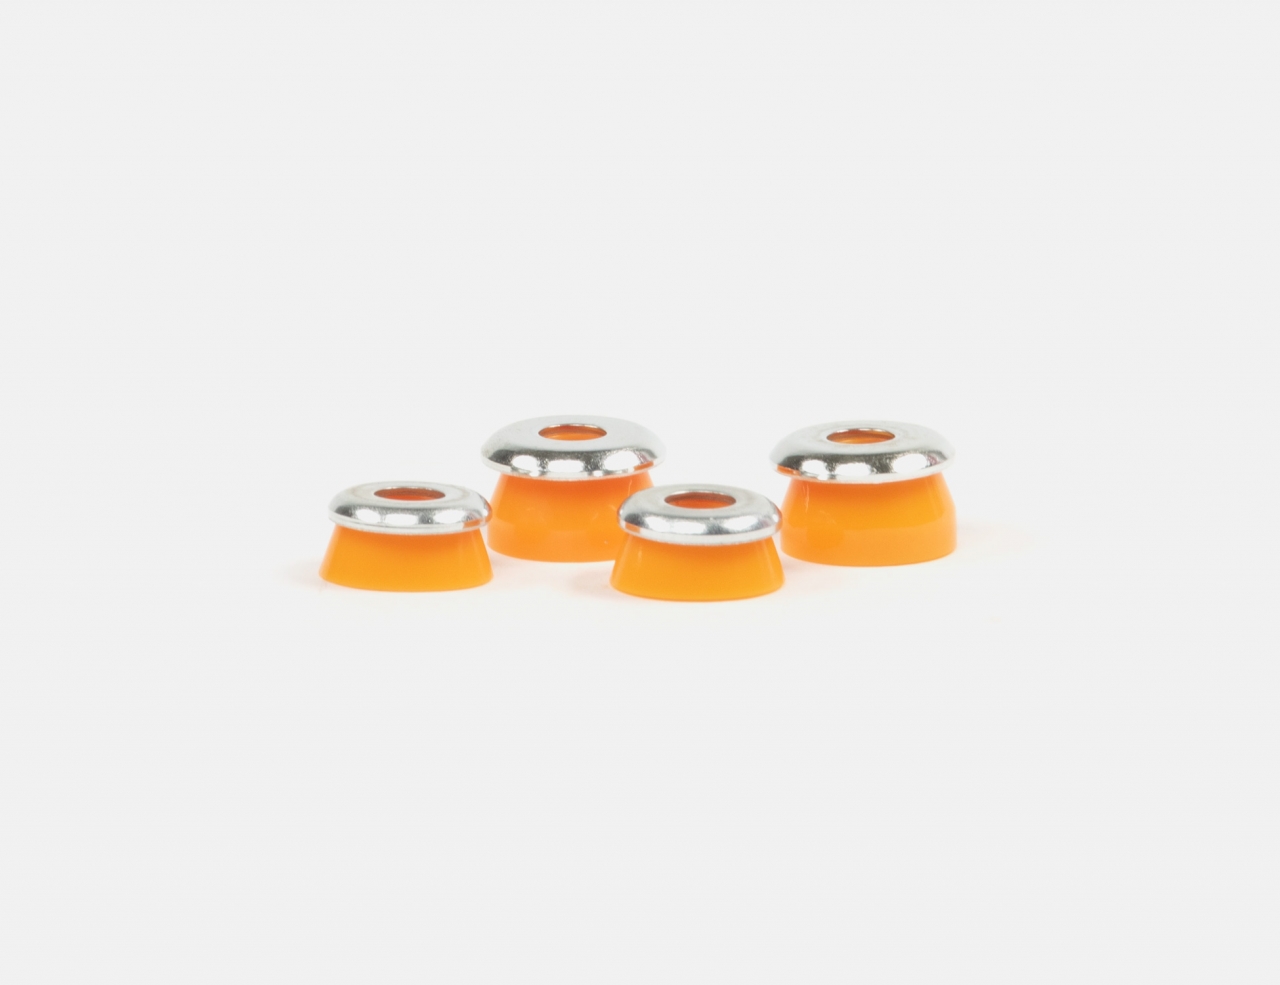 Independent Standard Conical Cushions Medium 90A Bushings - Orange